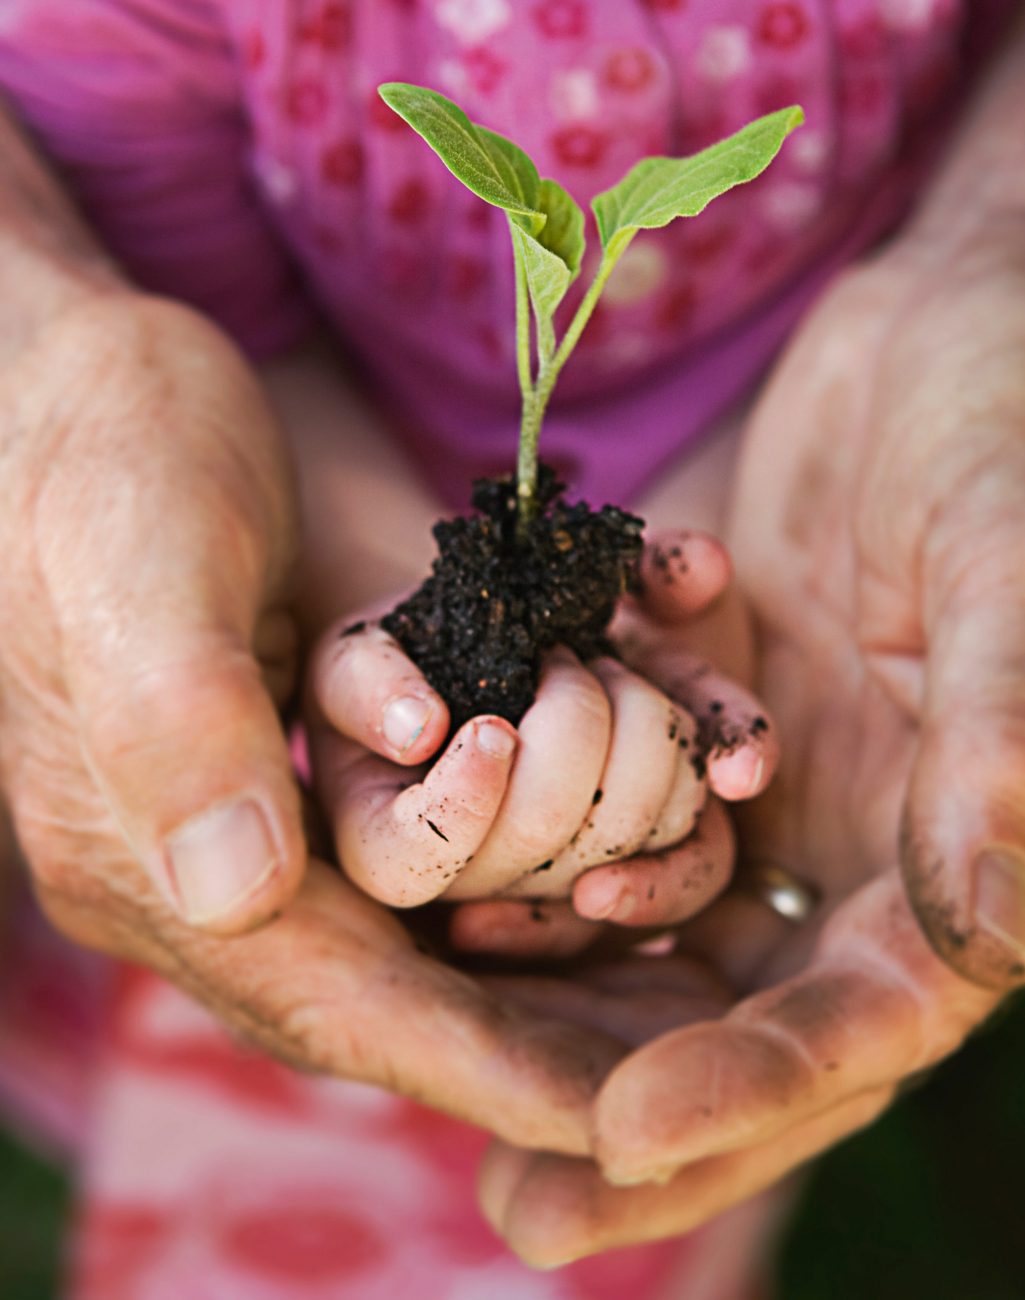 Child holding plant --- Image by © Strauss/Curtis/Corbis